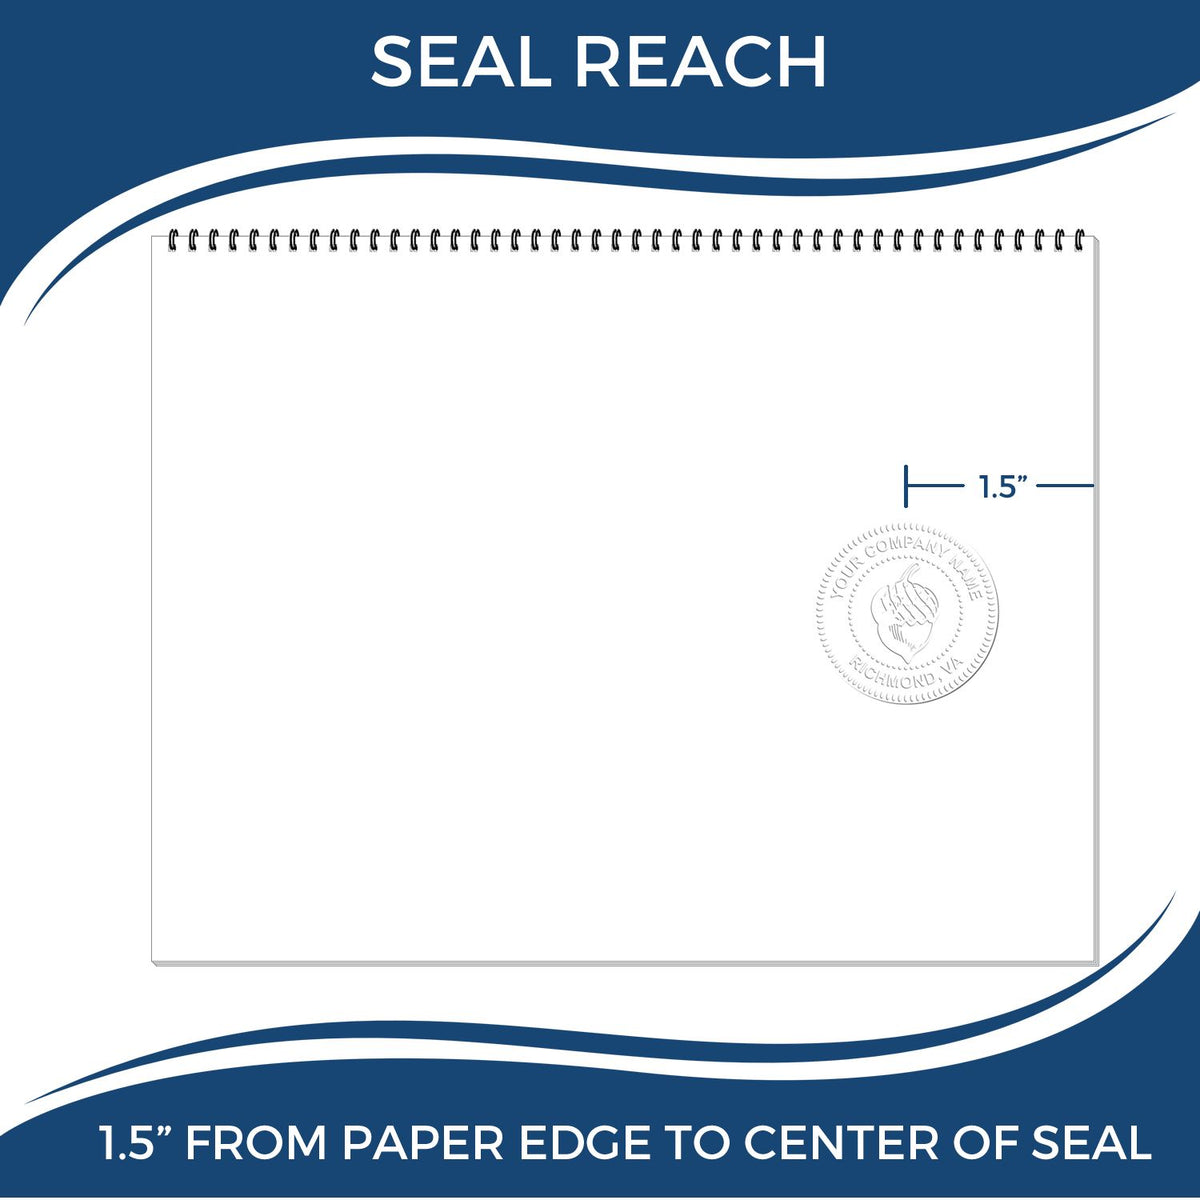 An infographic showing the seal reach which is represented by a ruler and a miniature seal image of the Soft Pocket North Dakota Landscape Architect Embosser